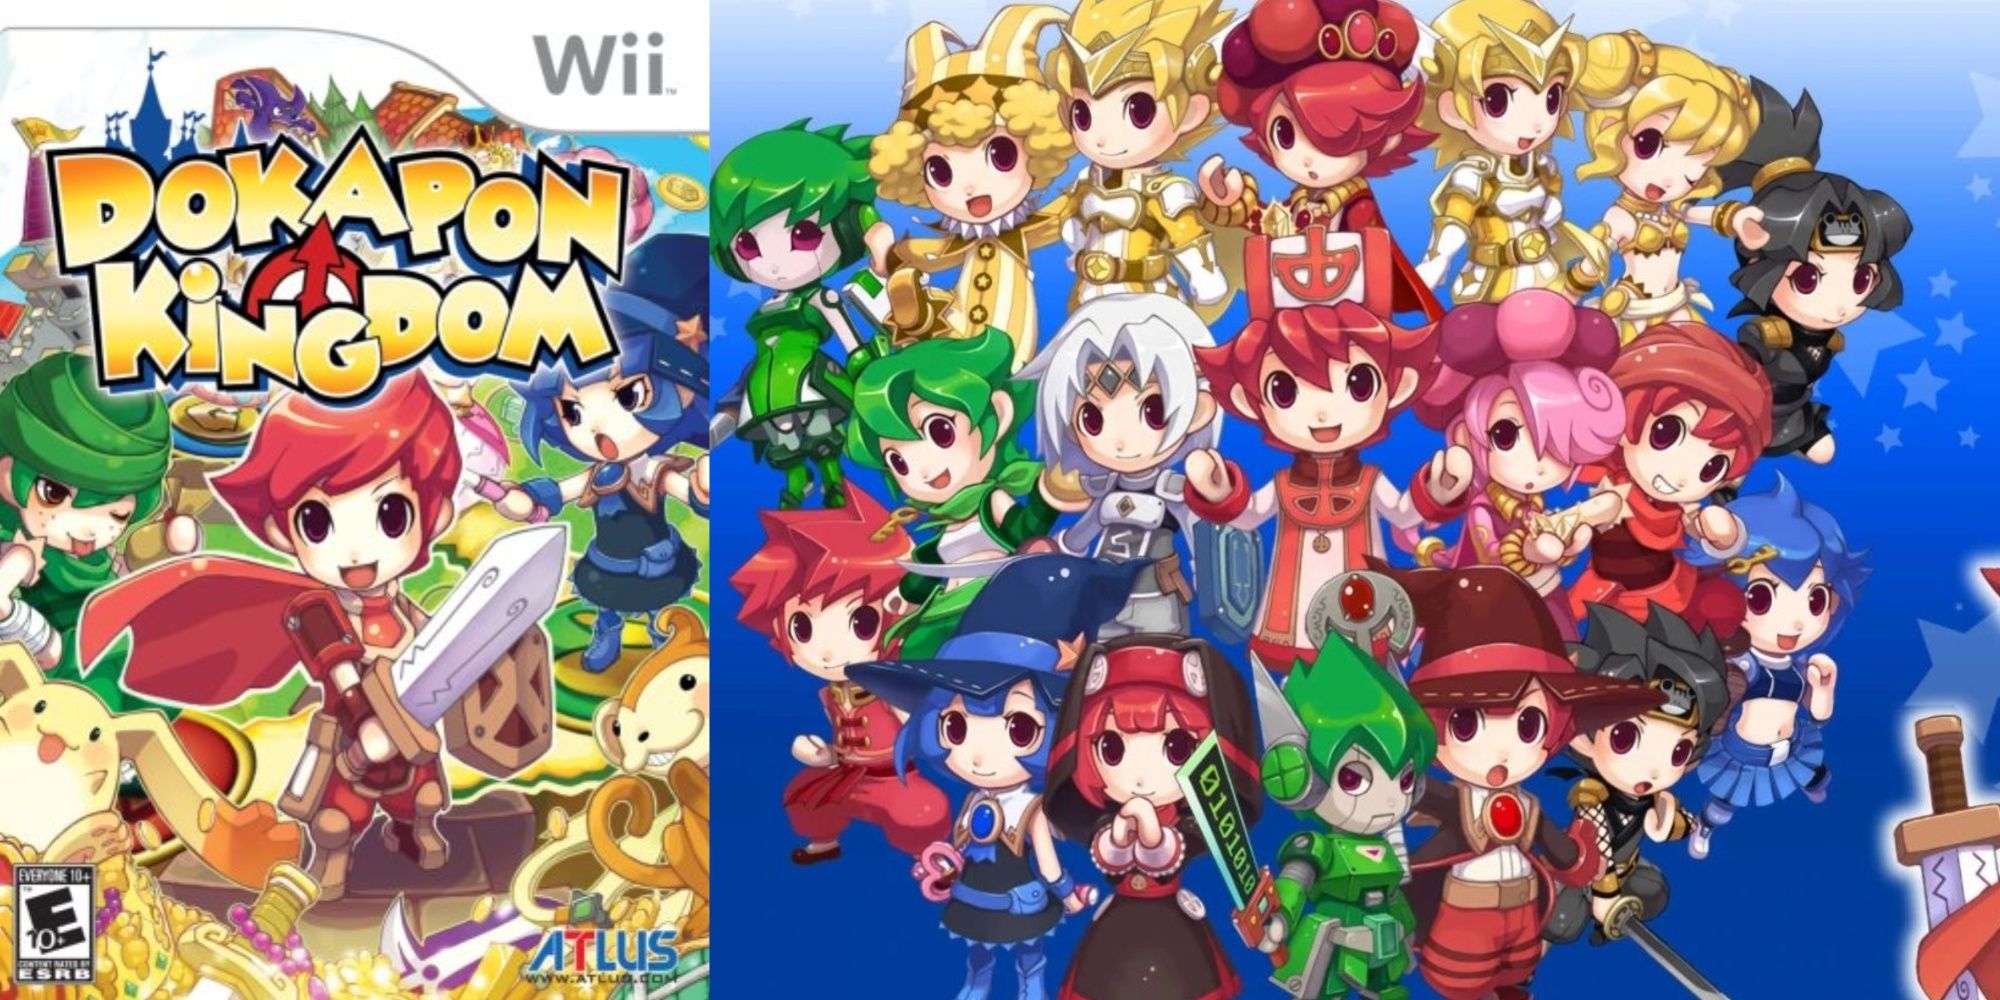 A split-image of the cover artwork for the Wii version of Dokapon Kingdom and a wallpaper image of all the main characters amid a blue background.